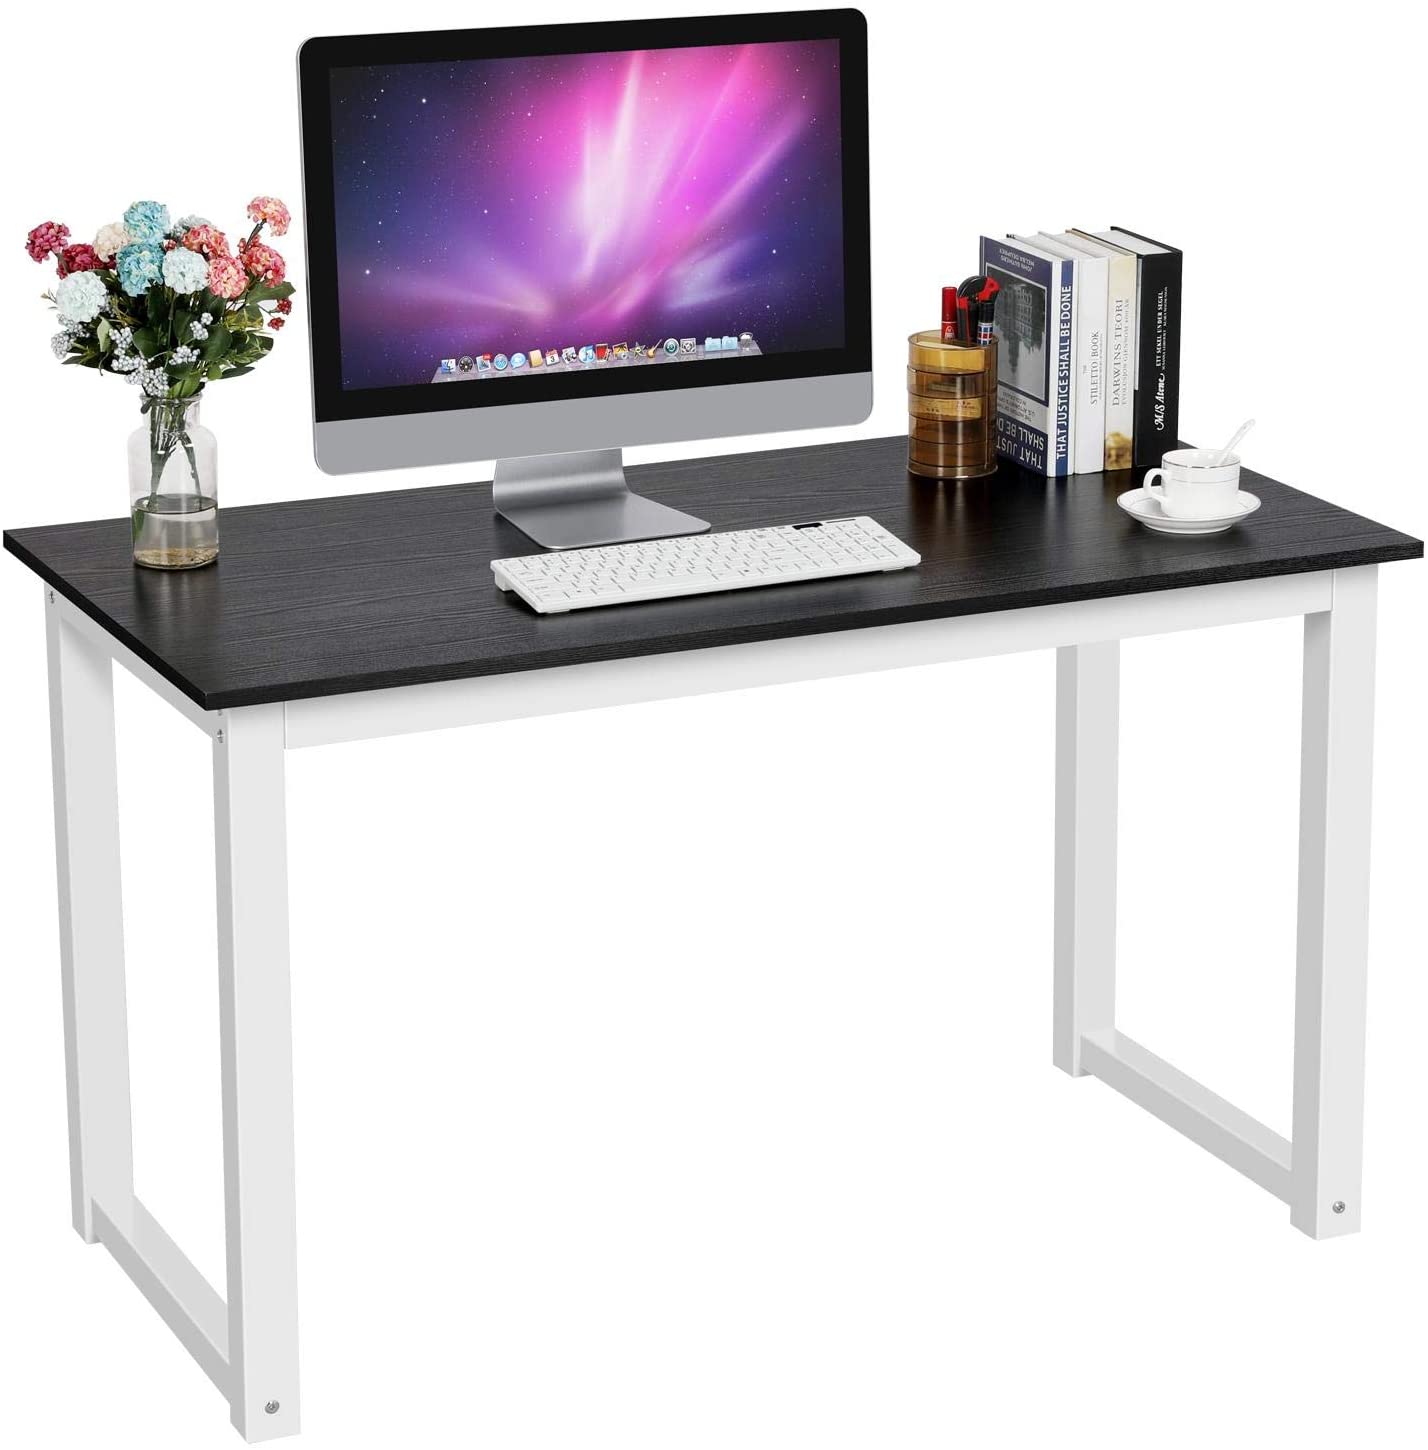 Yaheetech Simple Computer Desk, PC Laptop Writing Study Table, Gaming Computer Table, Workstation Wood Desktop Metal Frame, Modern Home Office Furniture